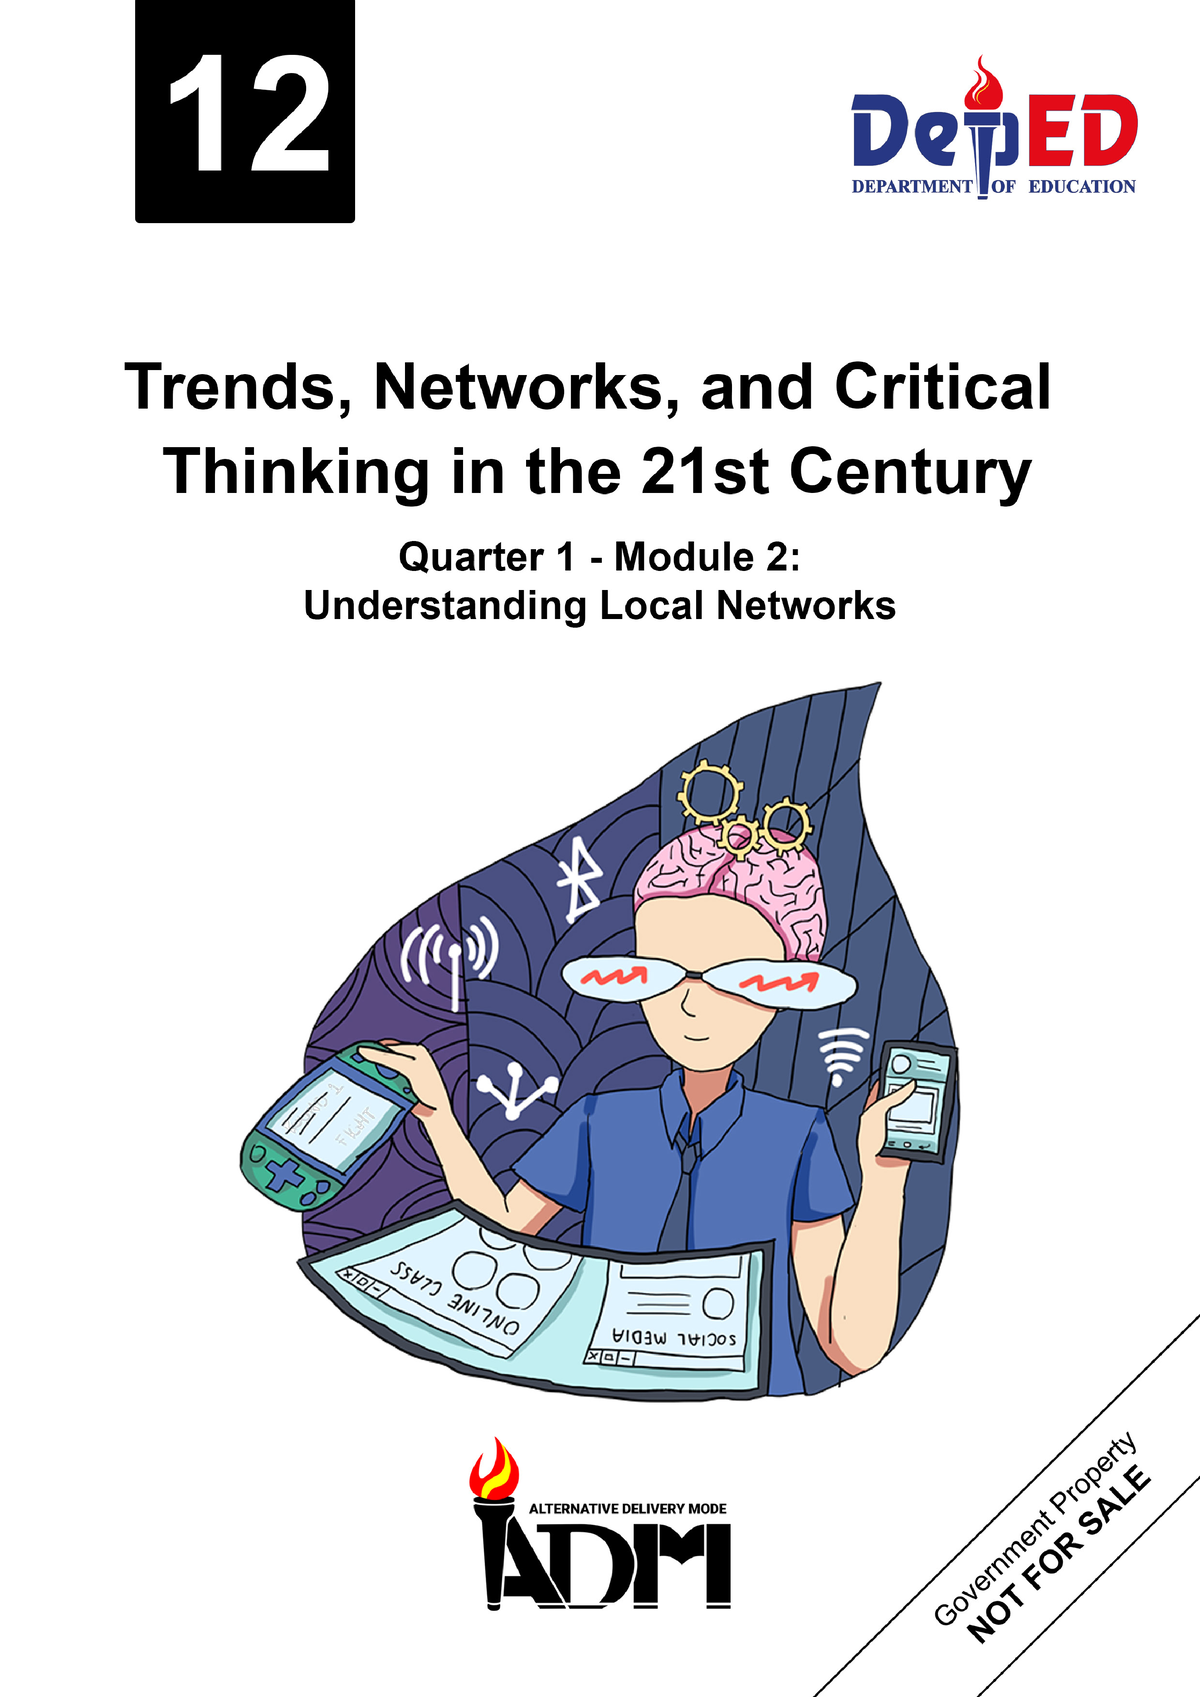 trends networks and critical thinking quarter 2 module 1